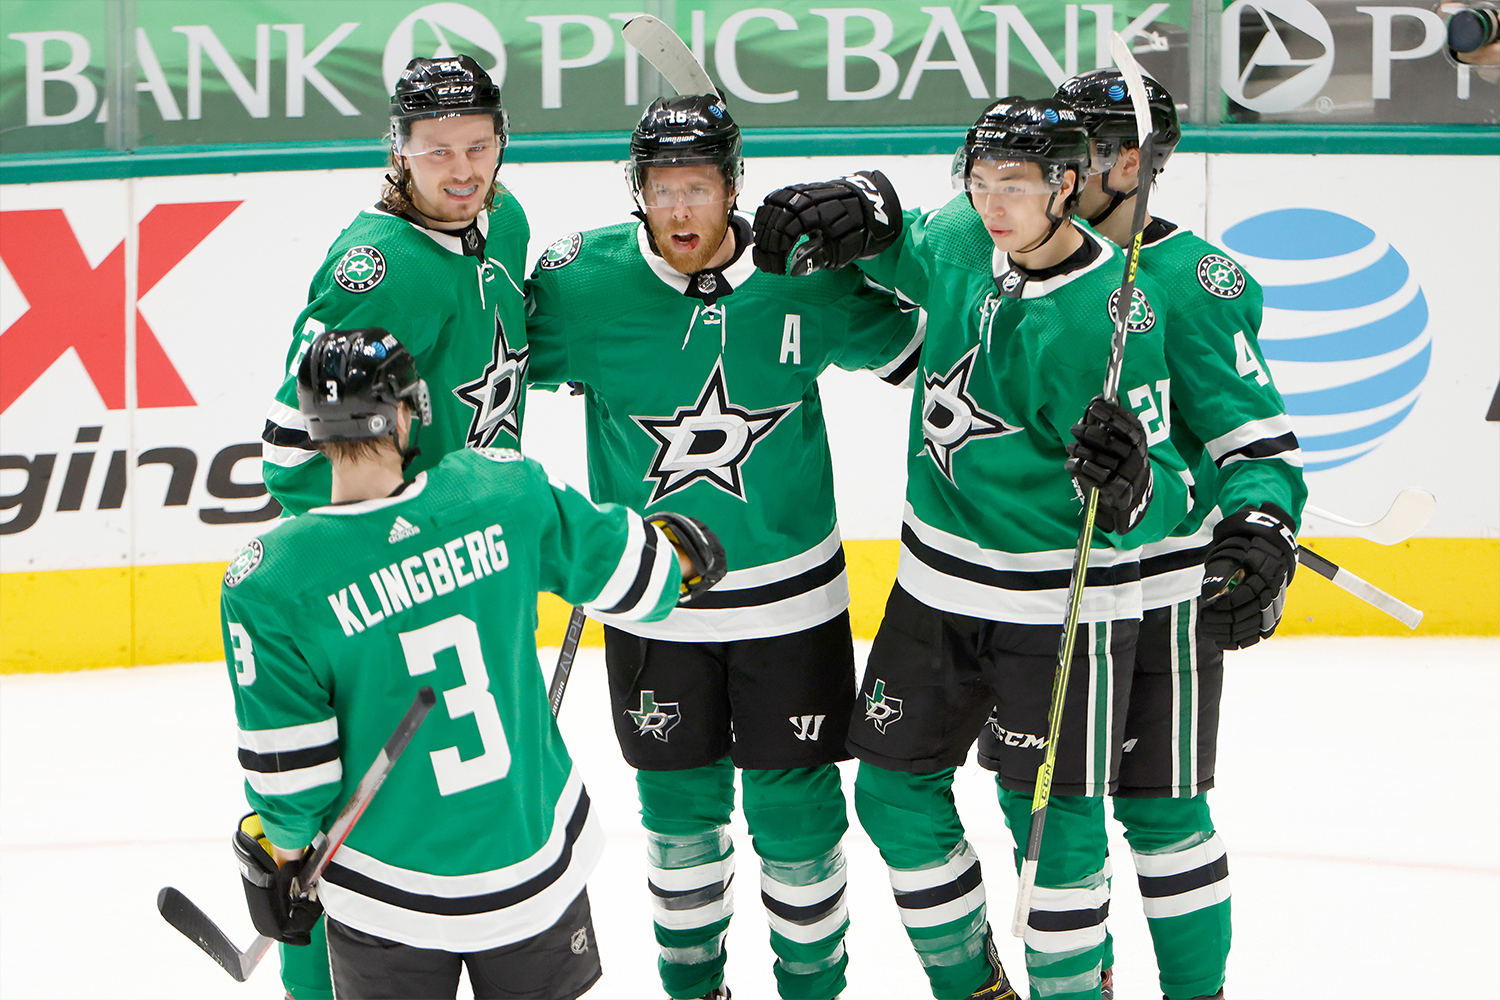 Joe Pavelski #16 of the Dallas Stars celebrates with Roope Hintz #24 of the Dallas Stars, Jason Robertson #21 of the Dallas Stars, Miro Heiskanen #4 of the Dallas Stars and John Klingberg #3 of the Dallas Stars after scoring a goal against the Tampa Bay Lightning at American Airlines Center on March 25, 2021